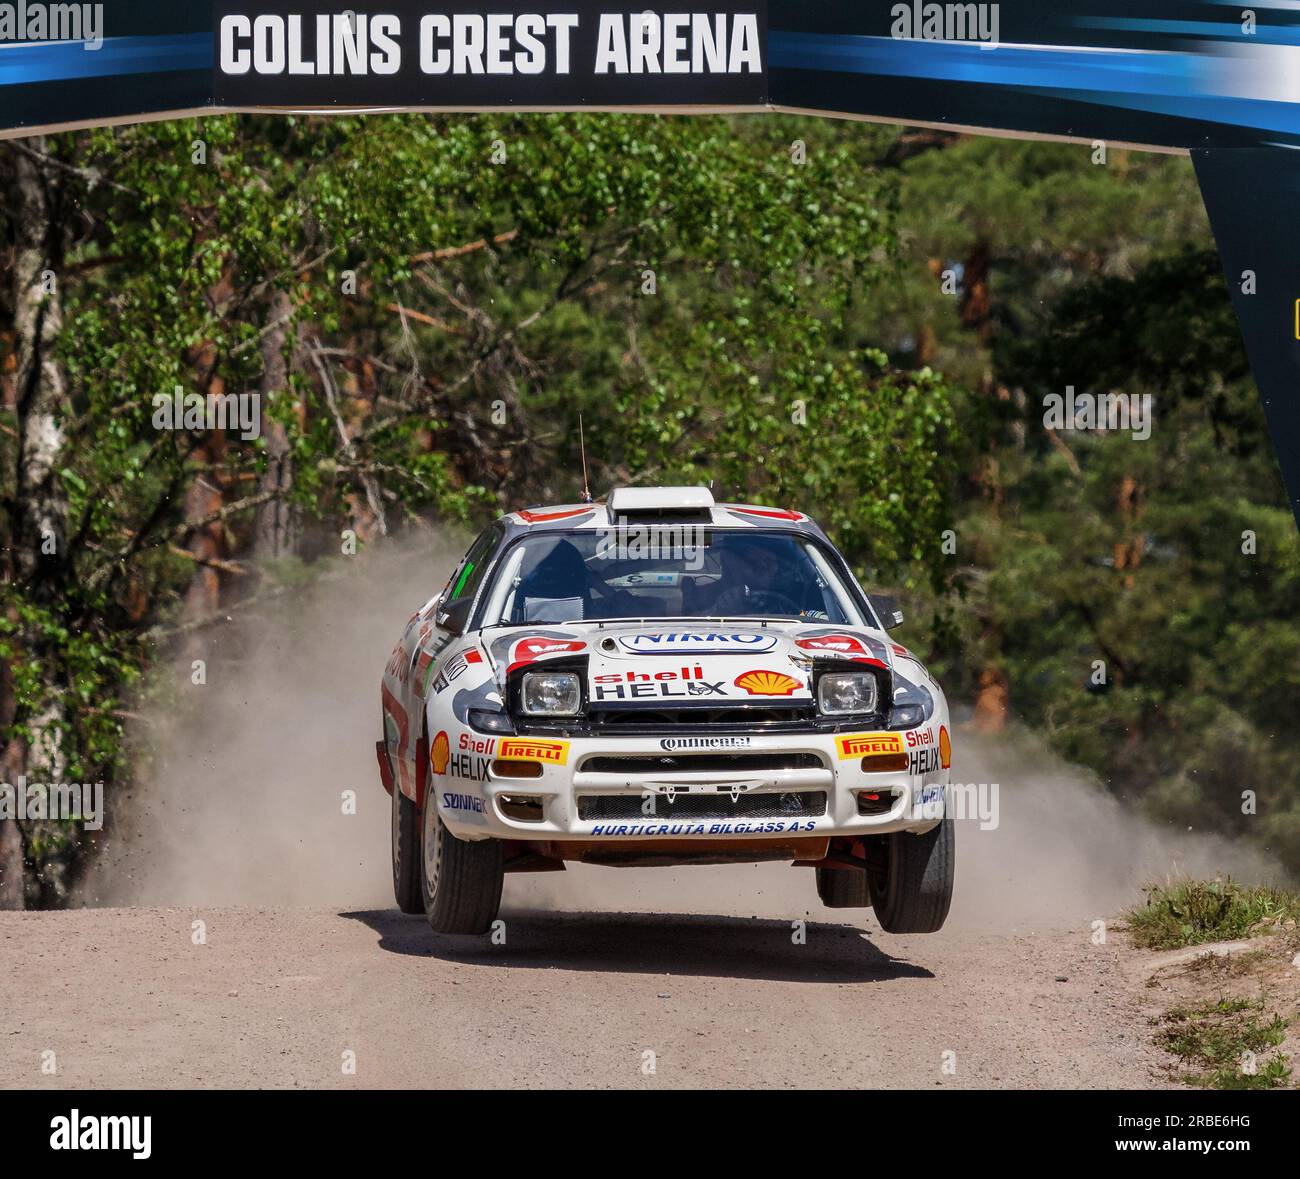 Karlstad, Sweden, 8 July, 2023  SS 16 - COLIN'S 2 (POWER STAGE) ERC Bauhaus Royal Rally of Scandinavia  Henning Solberg (NOR) with co-driver Maud Solberg (SWE), Toyota Celica 185  Credit: Peo Mšller/Alamy Live News Stock Photo